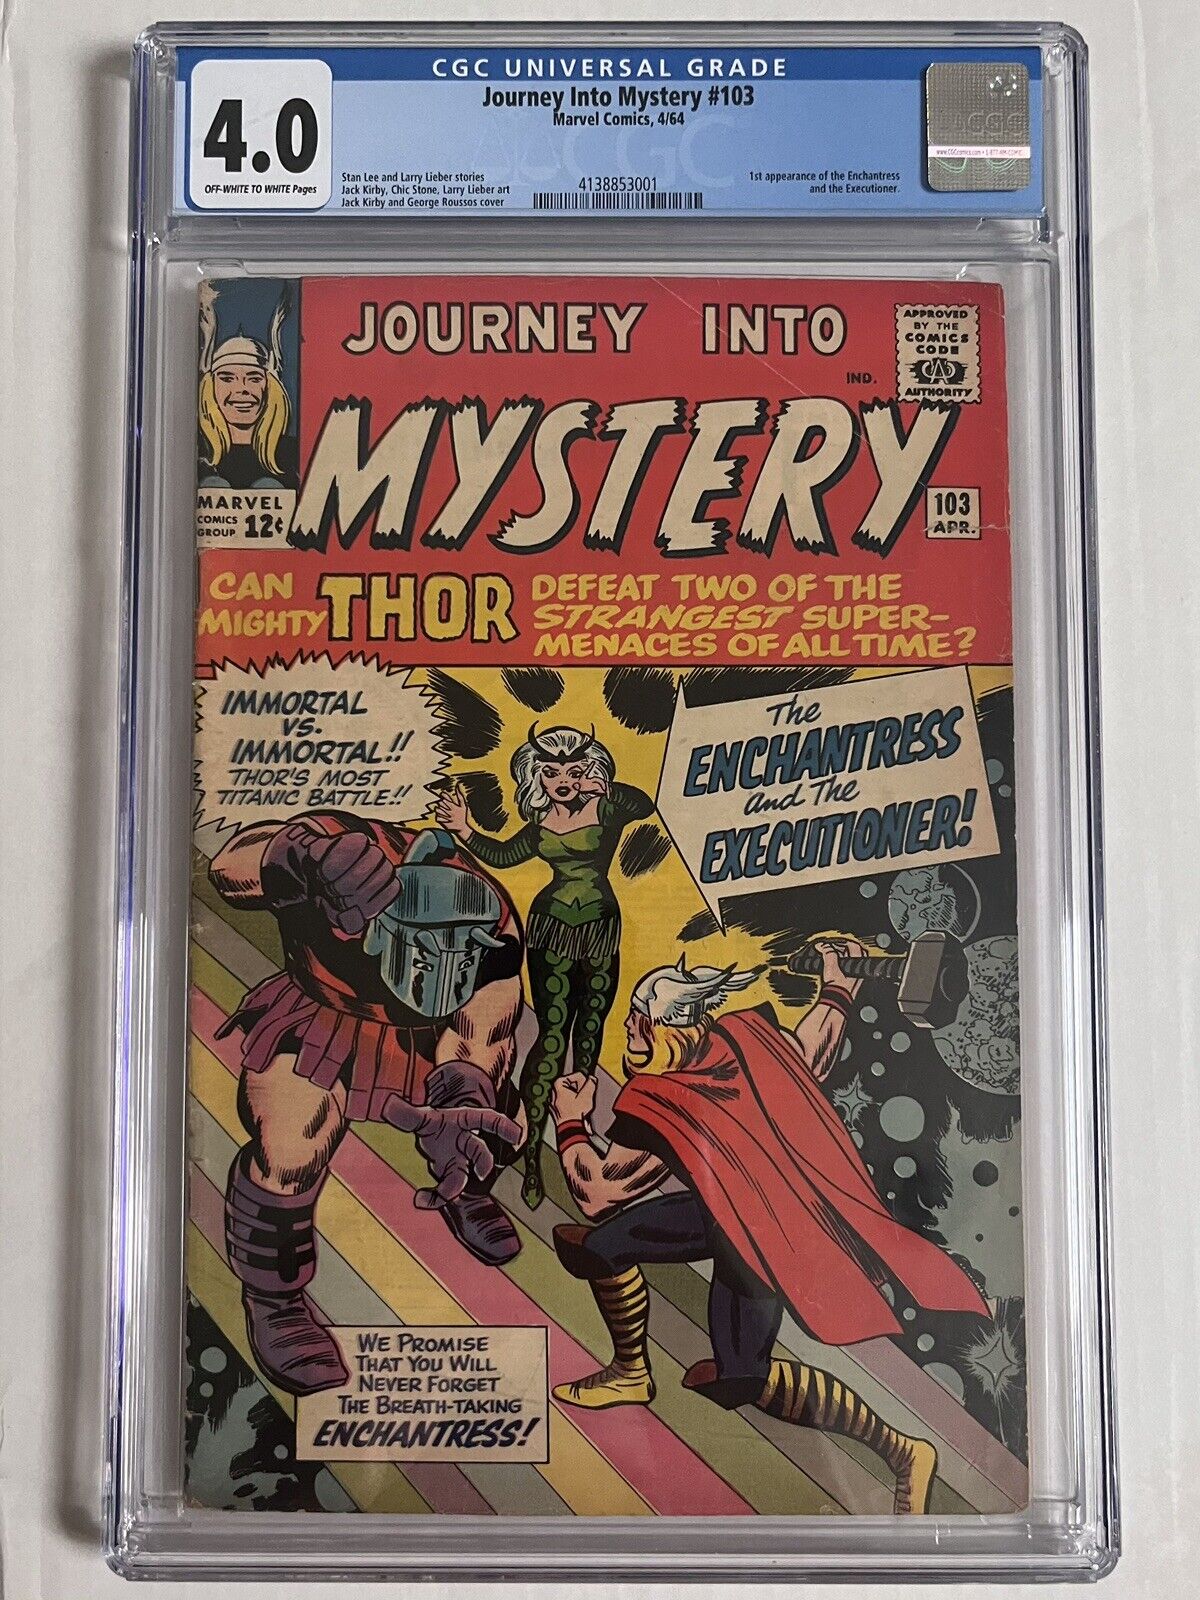 JOURNEY INTO MYSTERY #103 (1964) CGC 4.0 1st App. of Enchantress & Executioner.